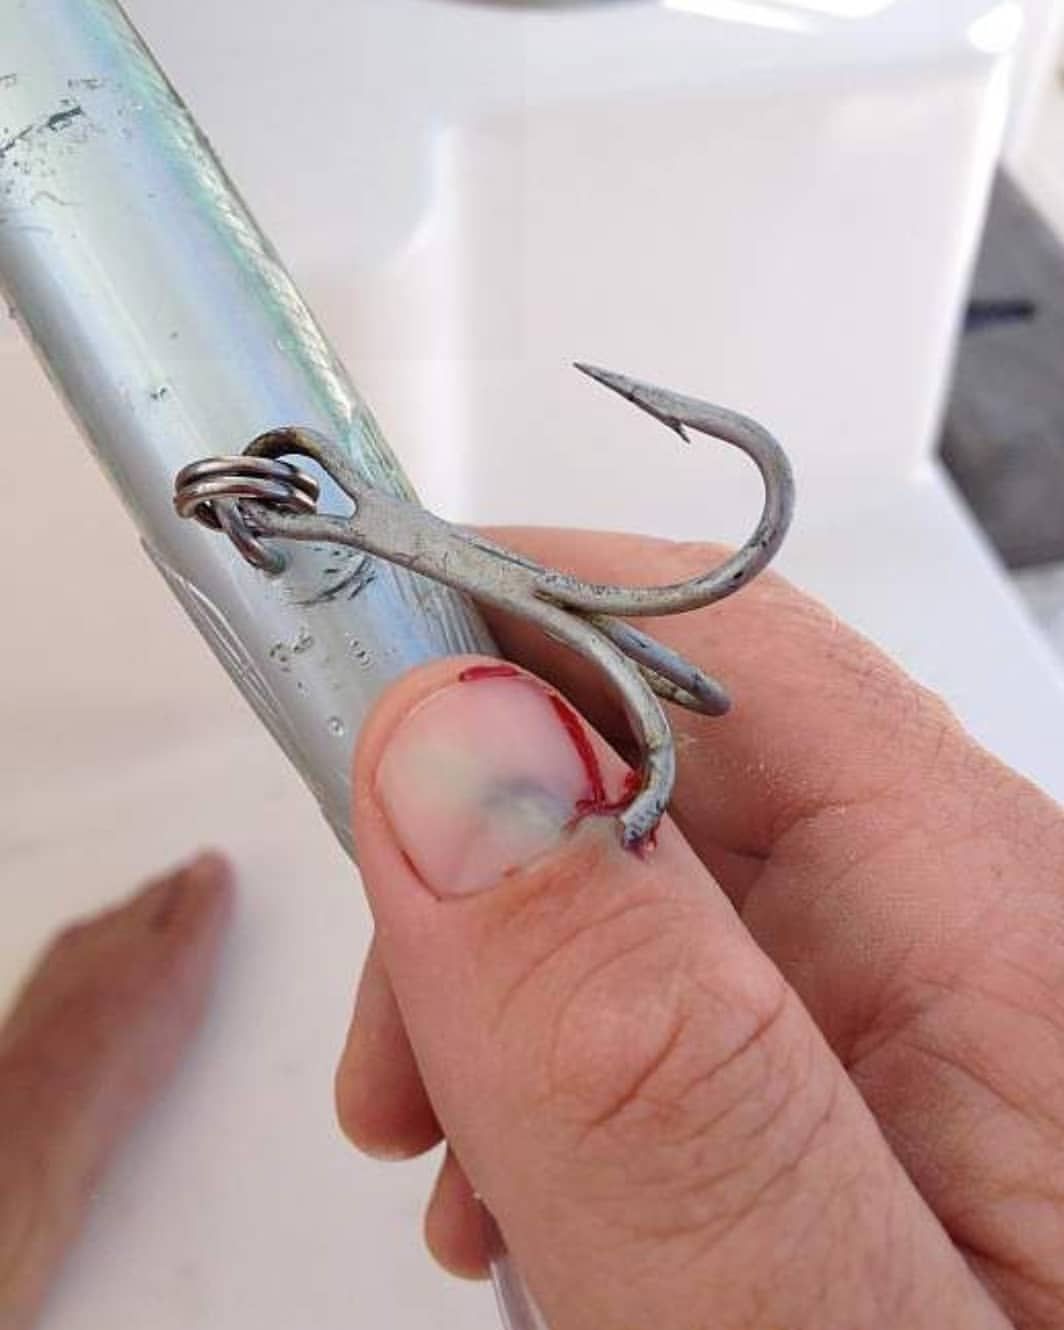 PDF) Fish-hook injuries: A risk for fishermen